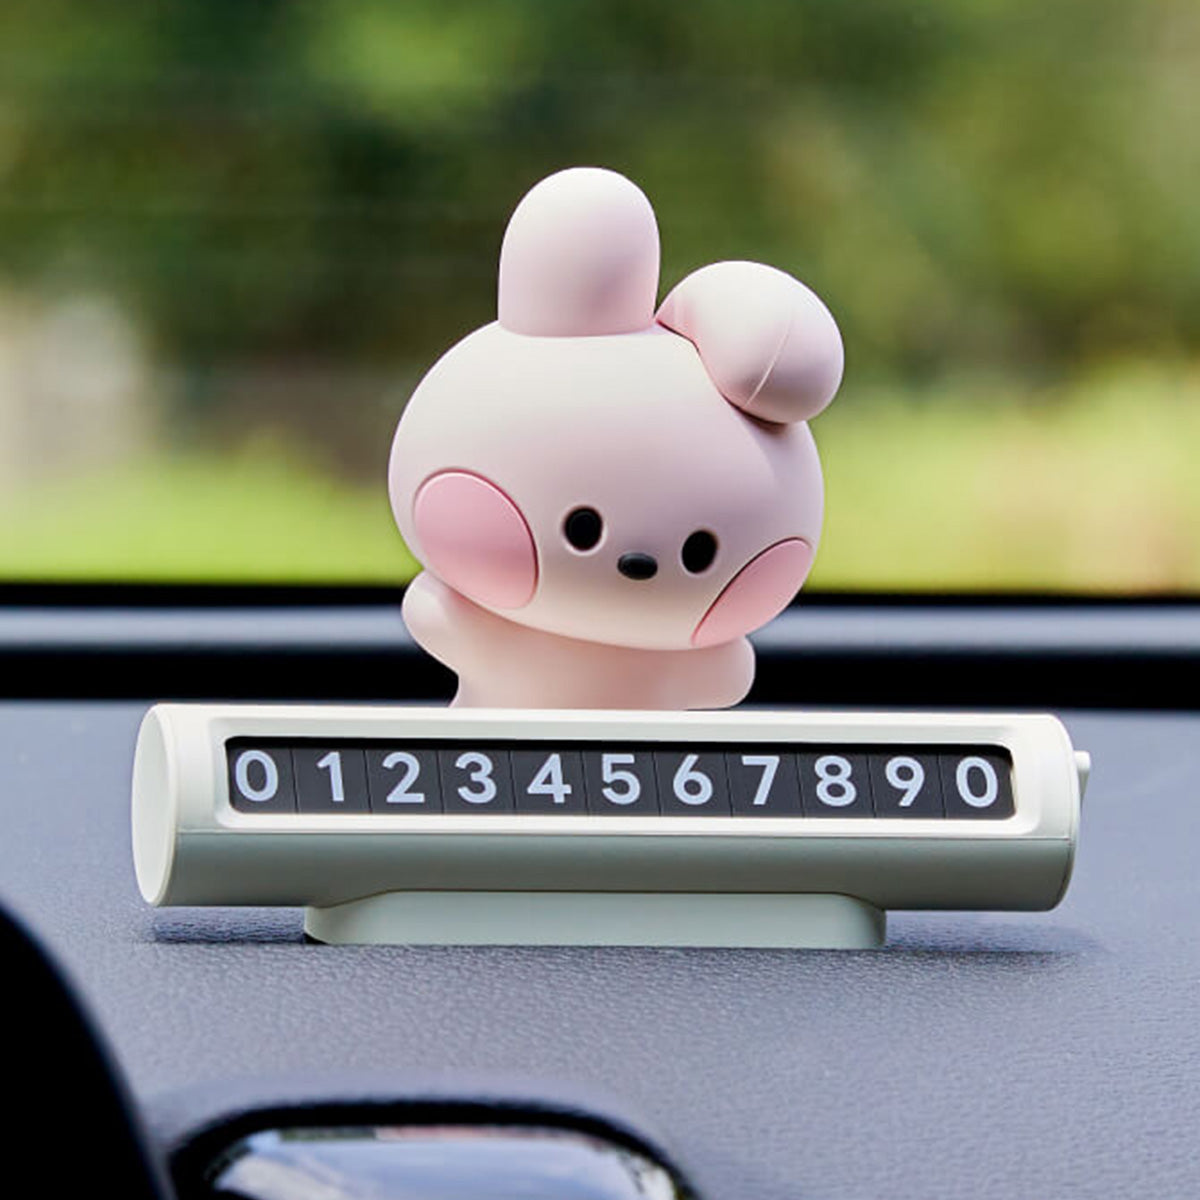 BT21 COOKY minini Parking Phone Number Plate